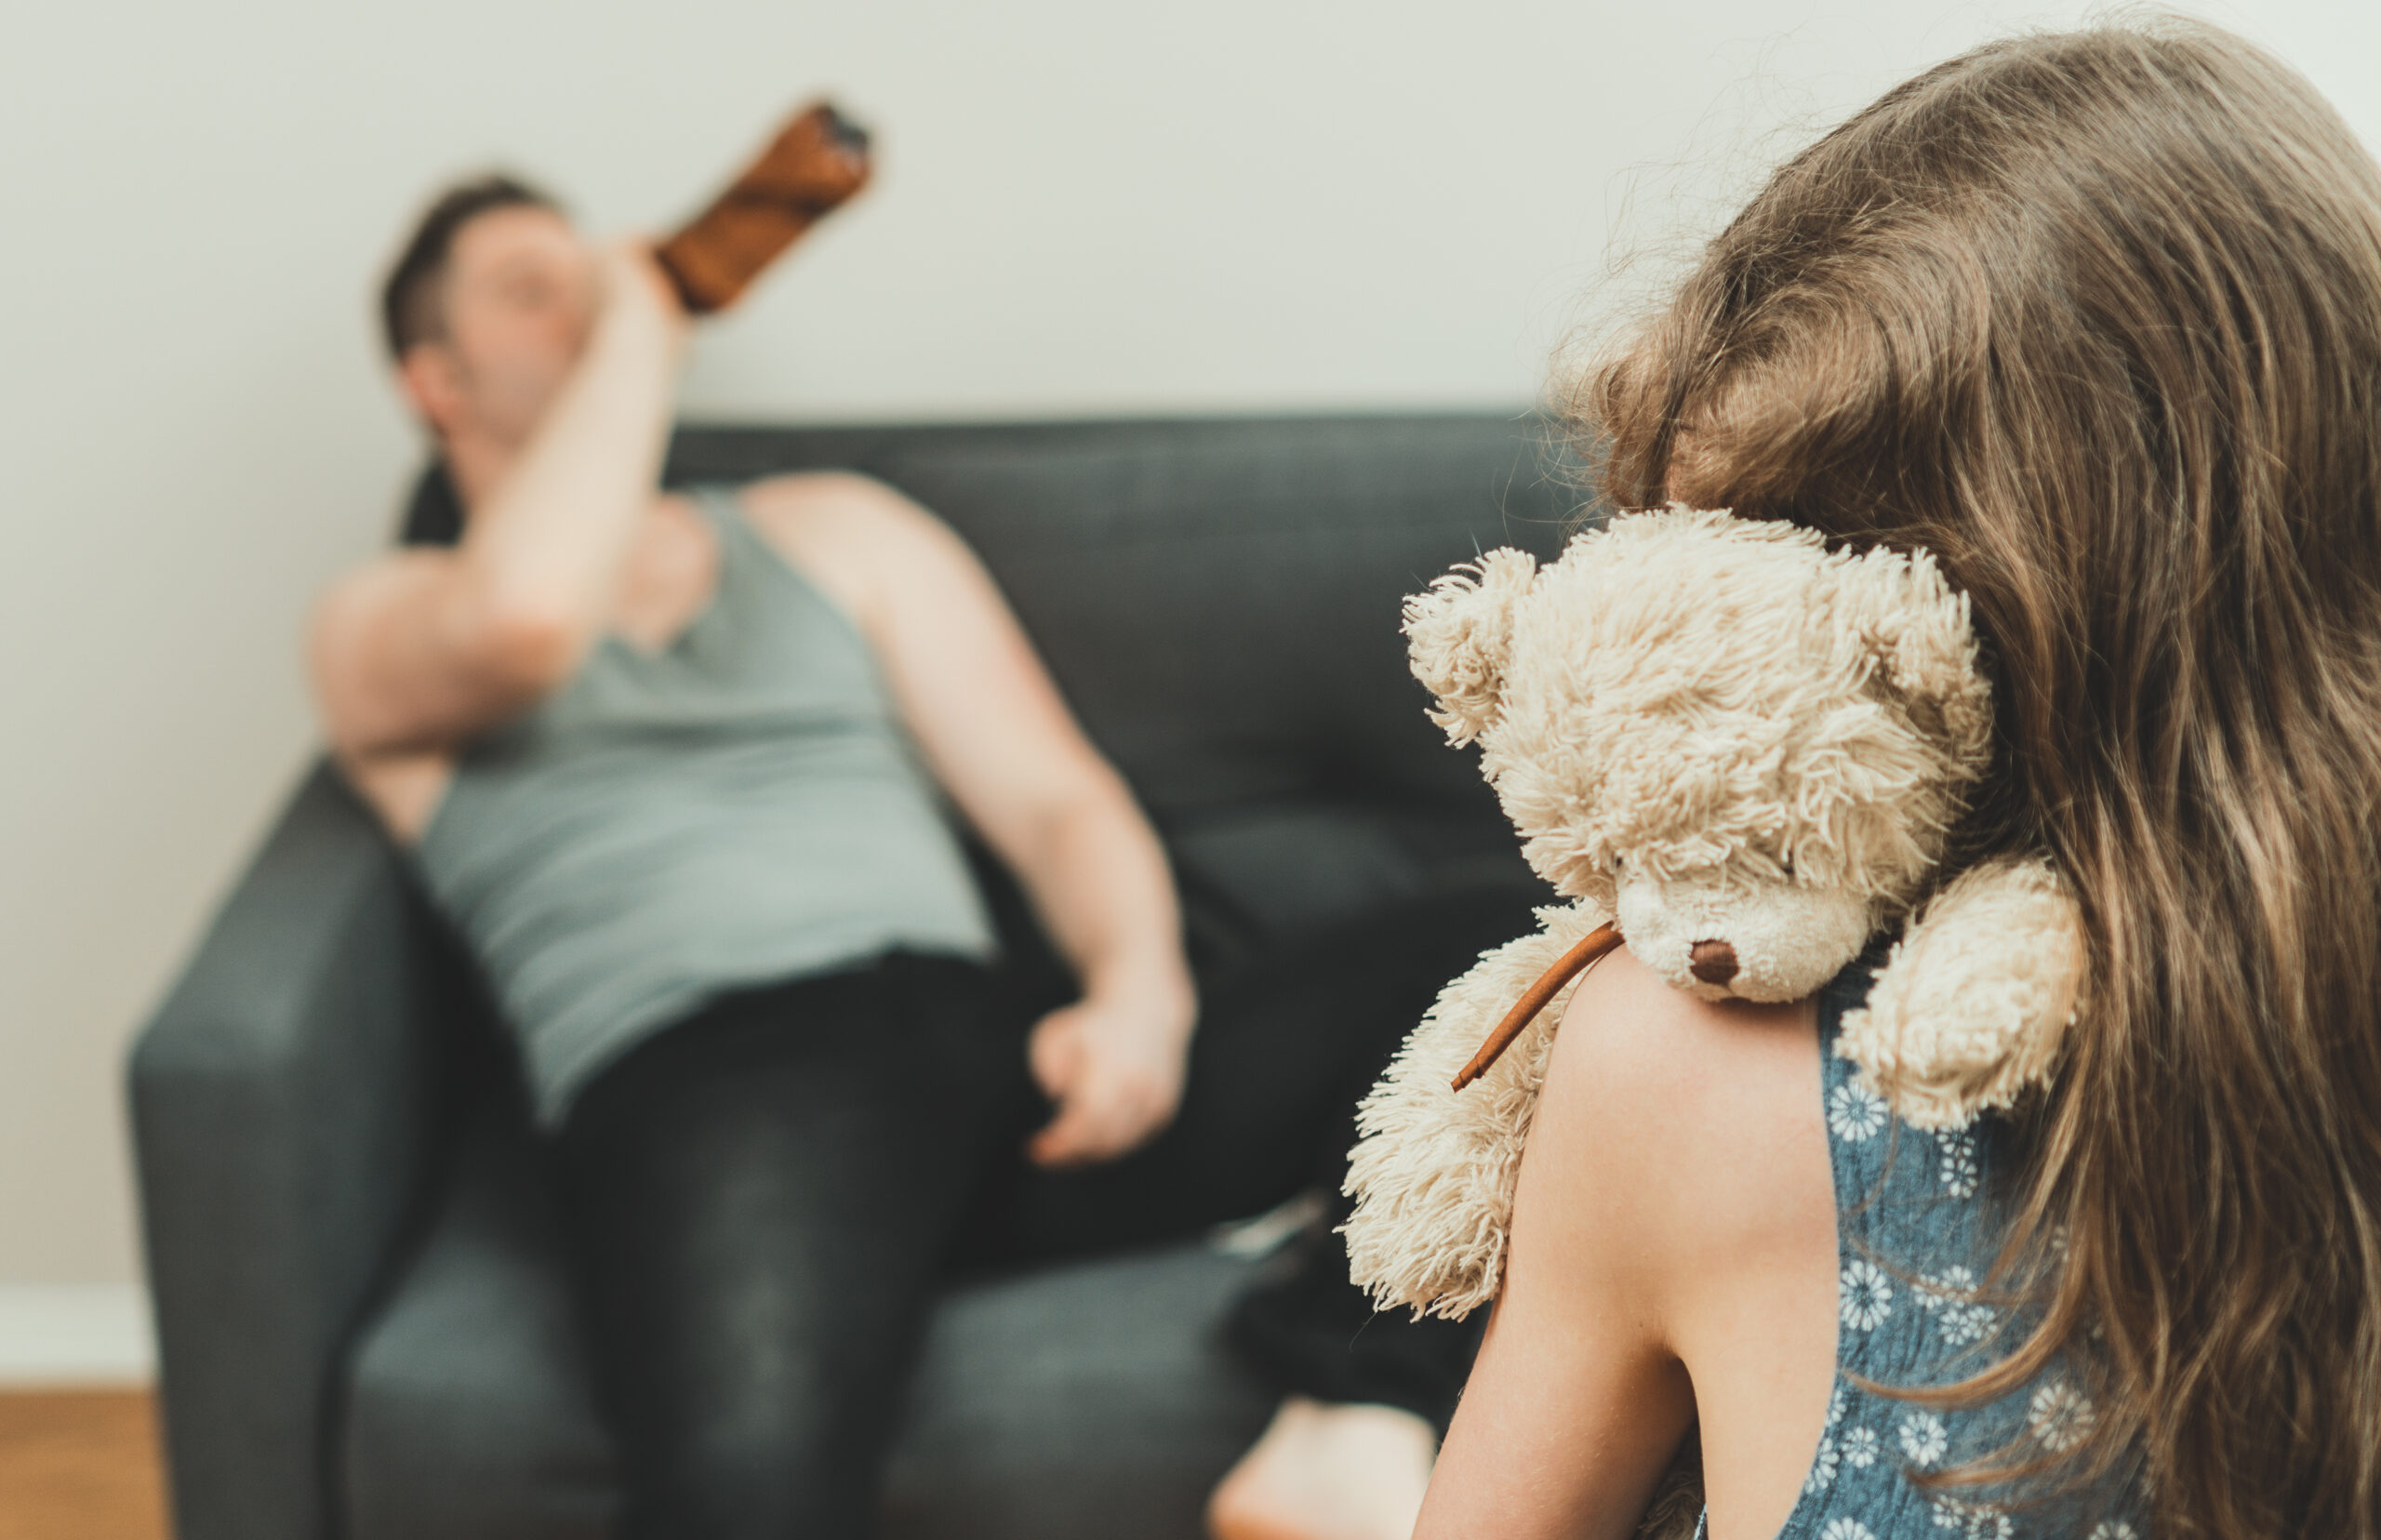 Little girl with toy standing in front of her drunk father. - Alcoholic Parent Concept image